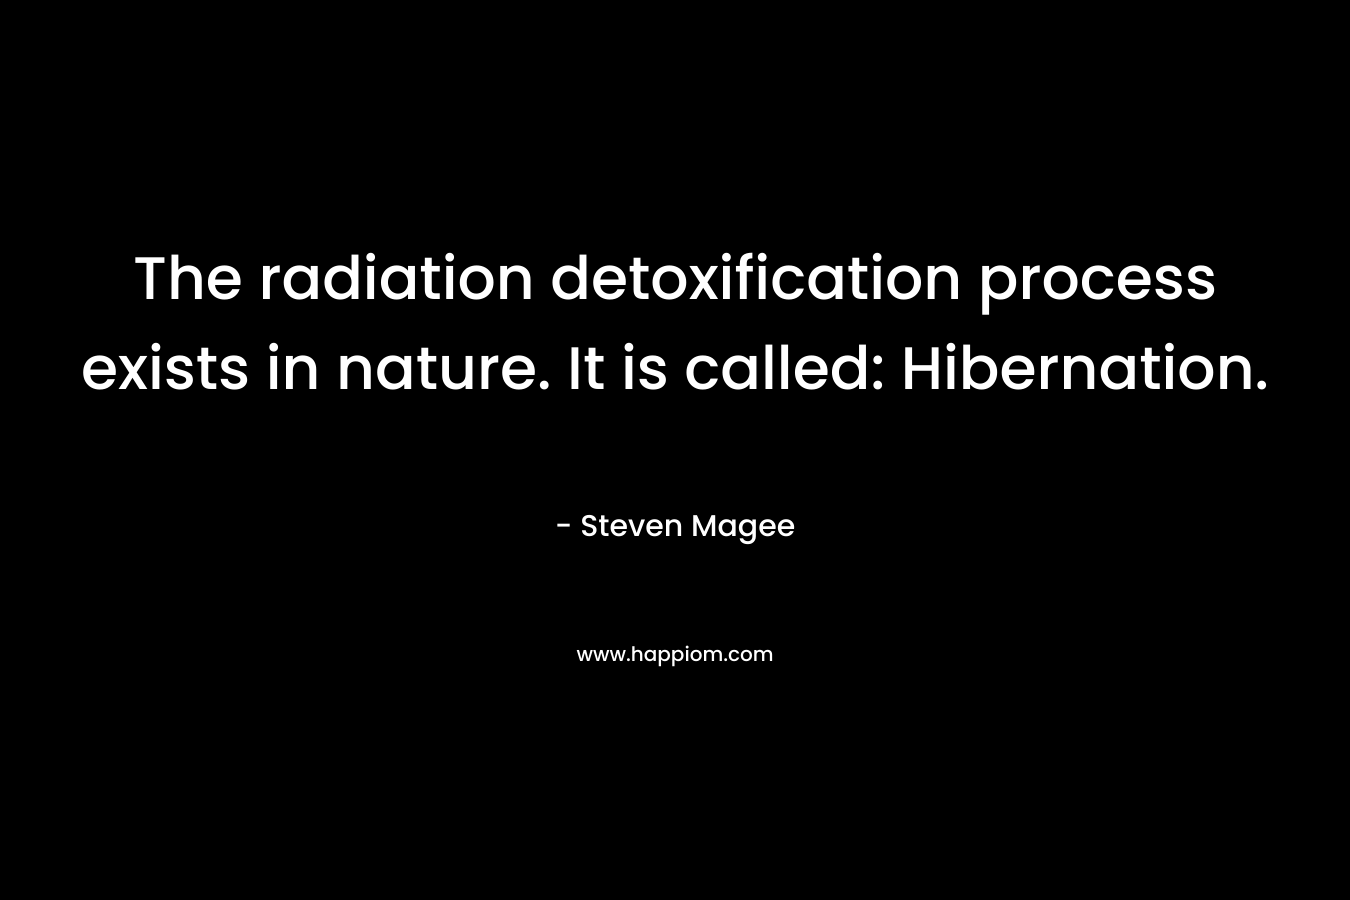 The radiation detoxification process exists in nature. It is called: Hibernation. – Steven Magee